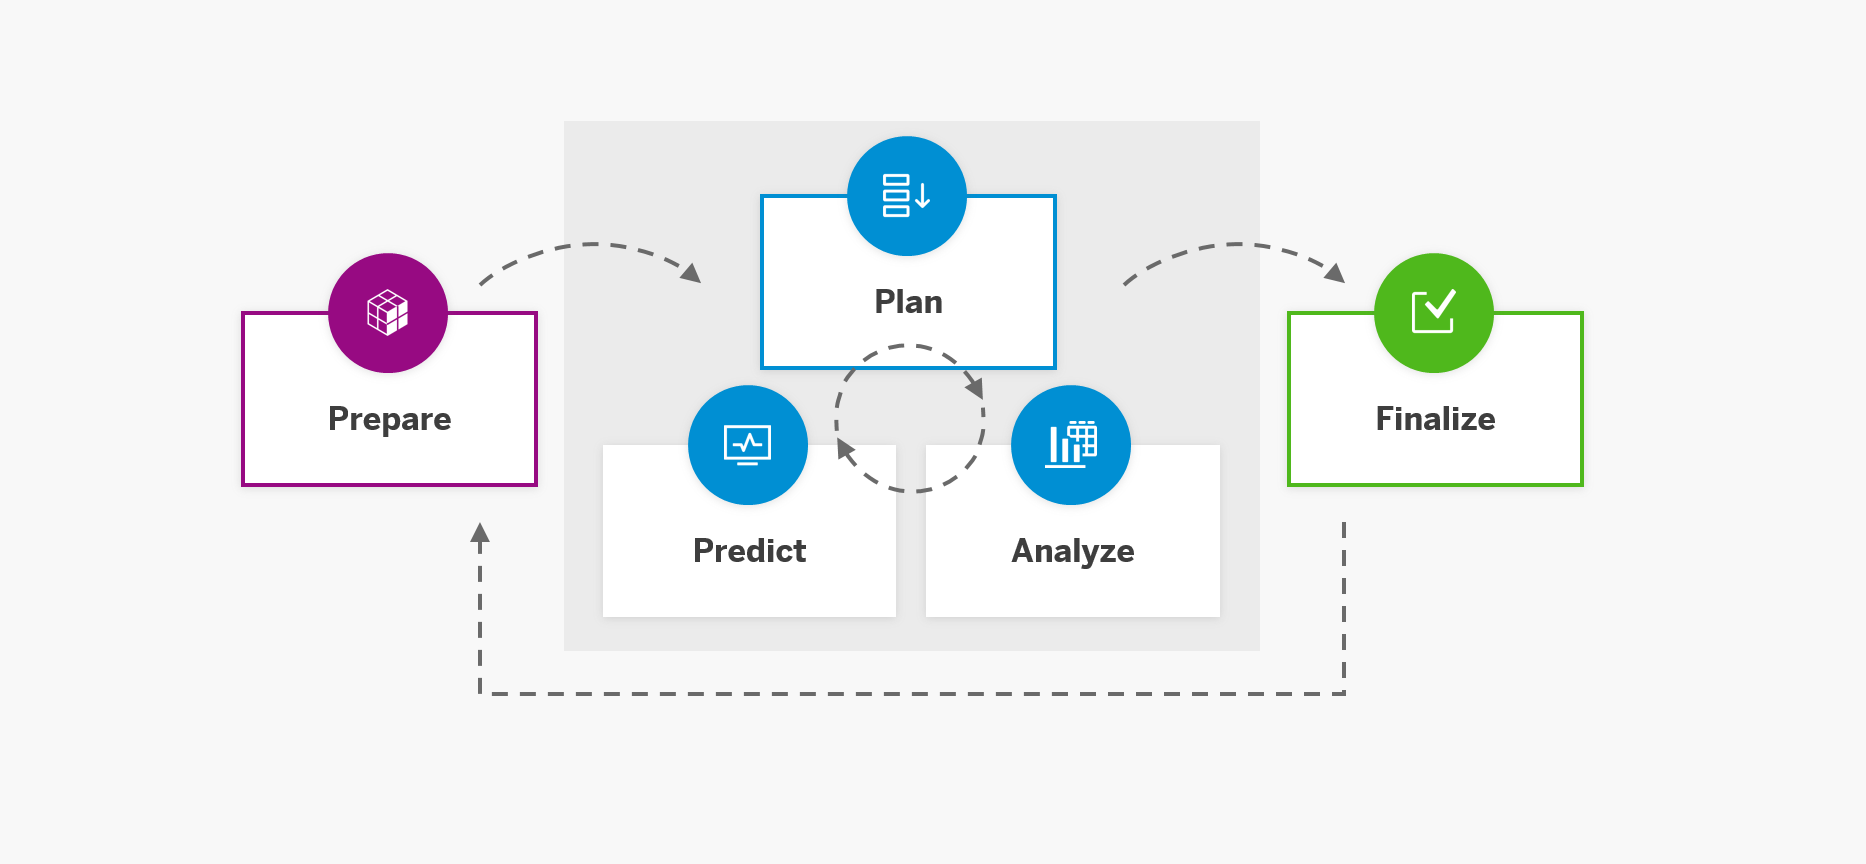 The planning cycle runs through the prepare, plan, and finalize phases, and then it repeats